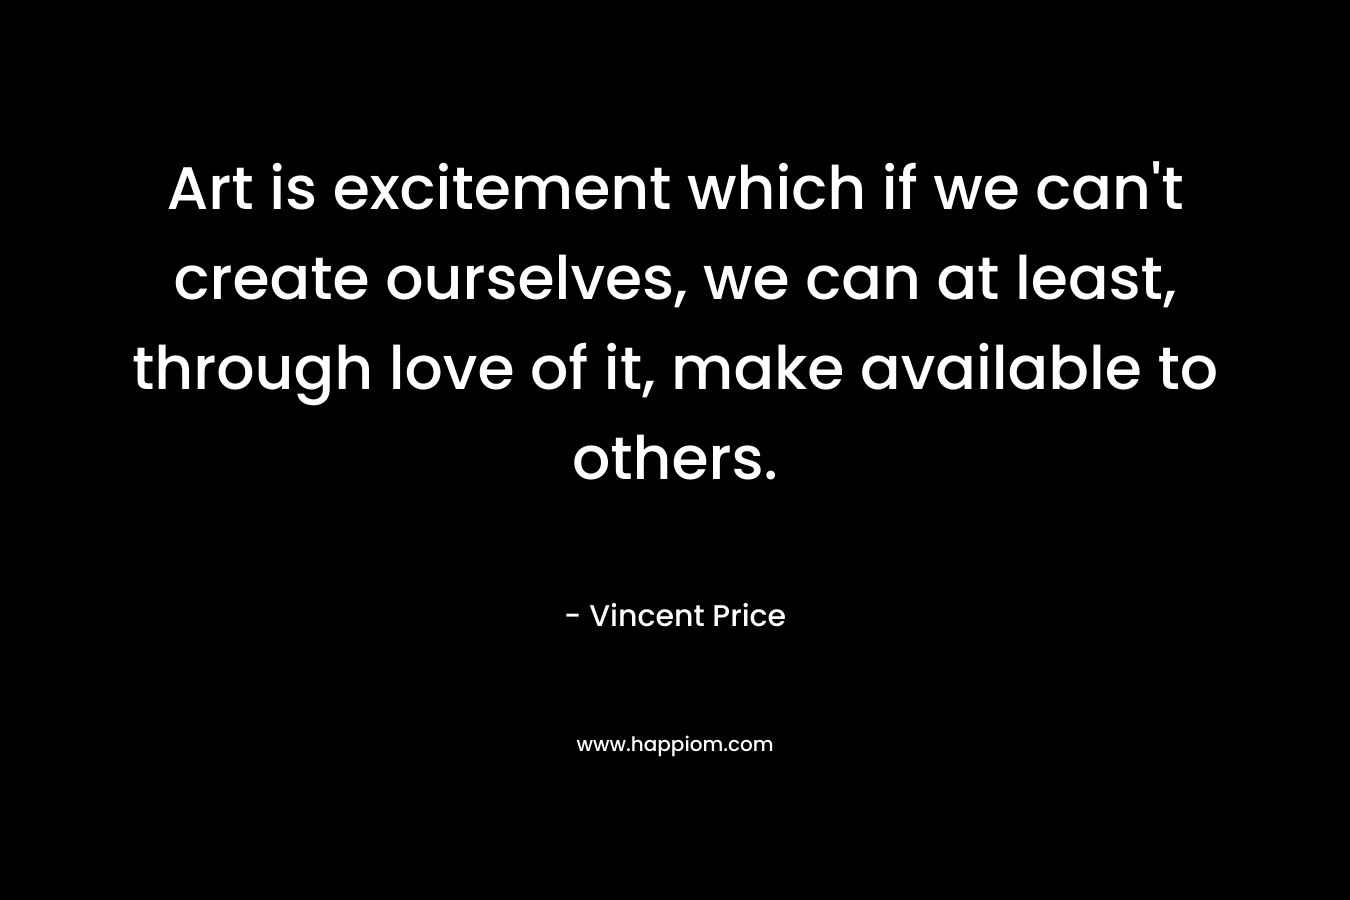 Art is excitement which if we can't create ourselves, we can at least, through love of it, make available to others.